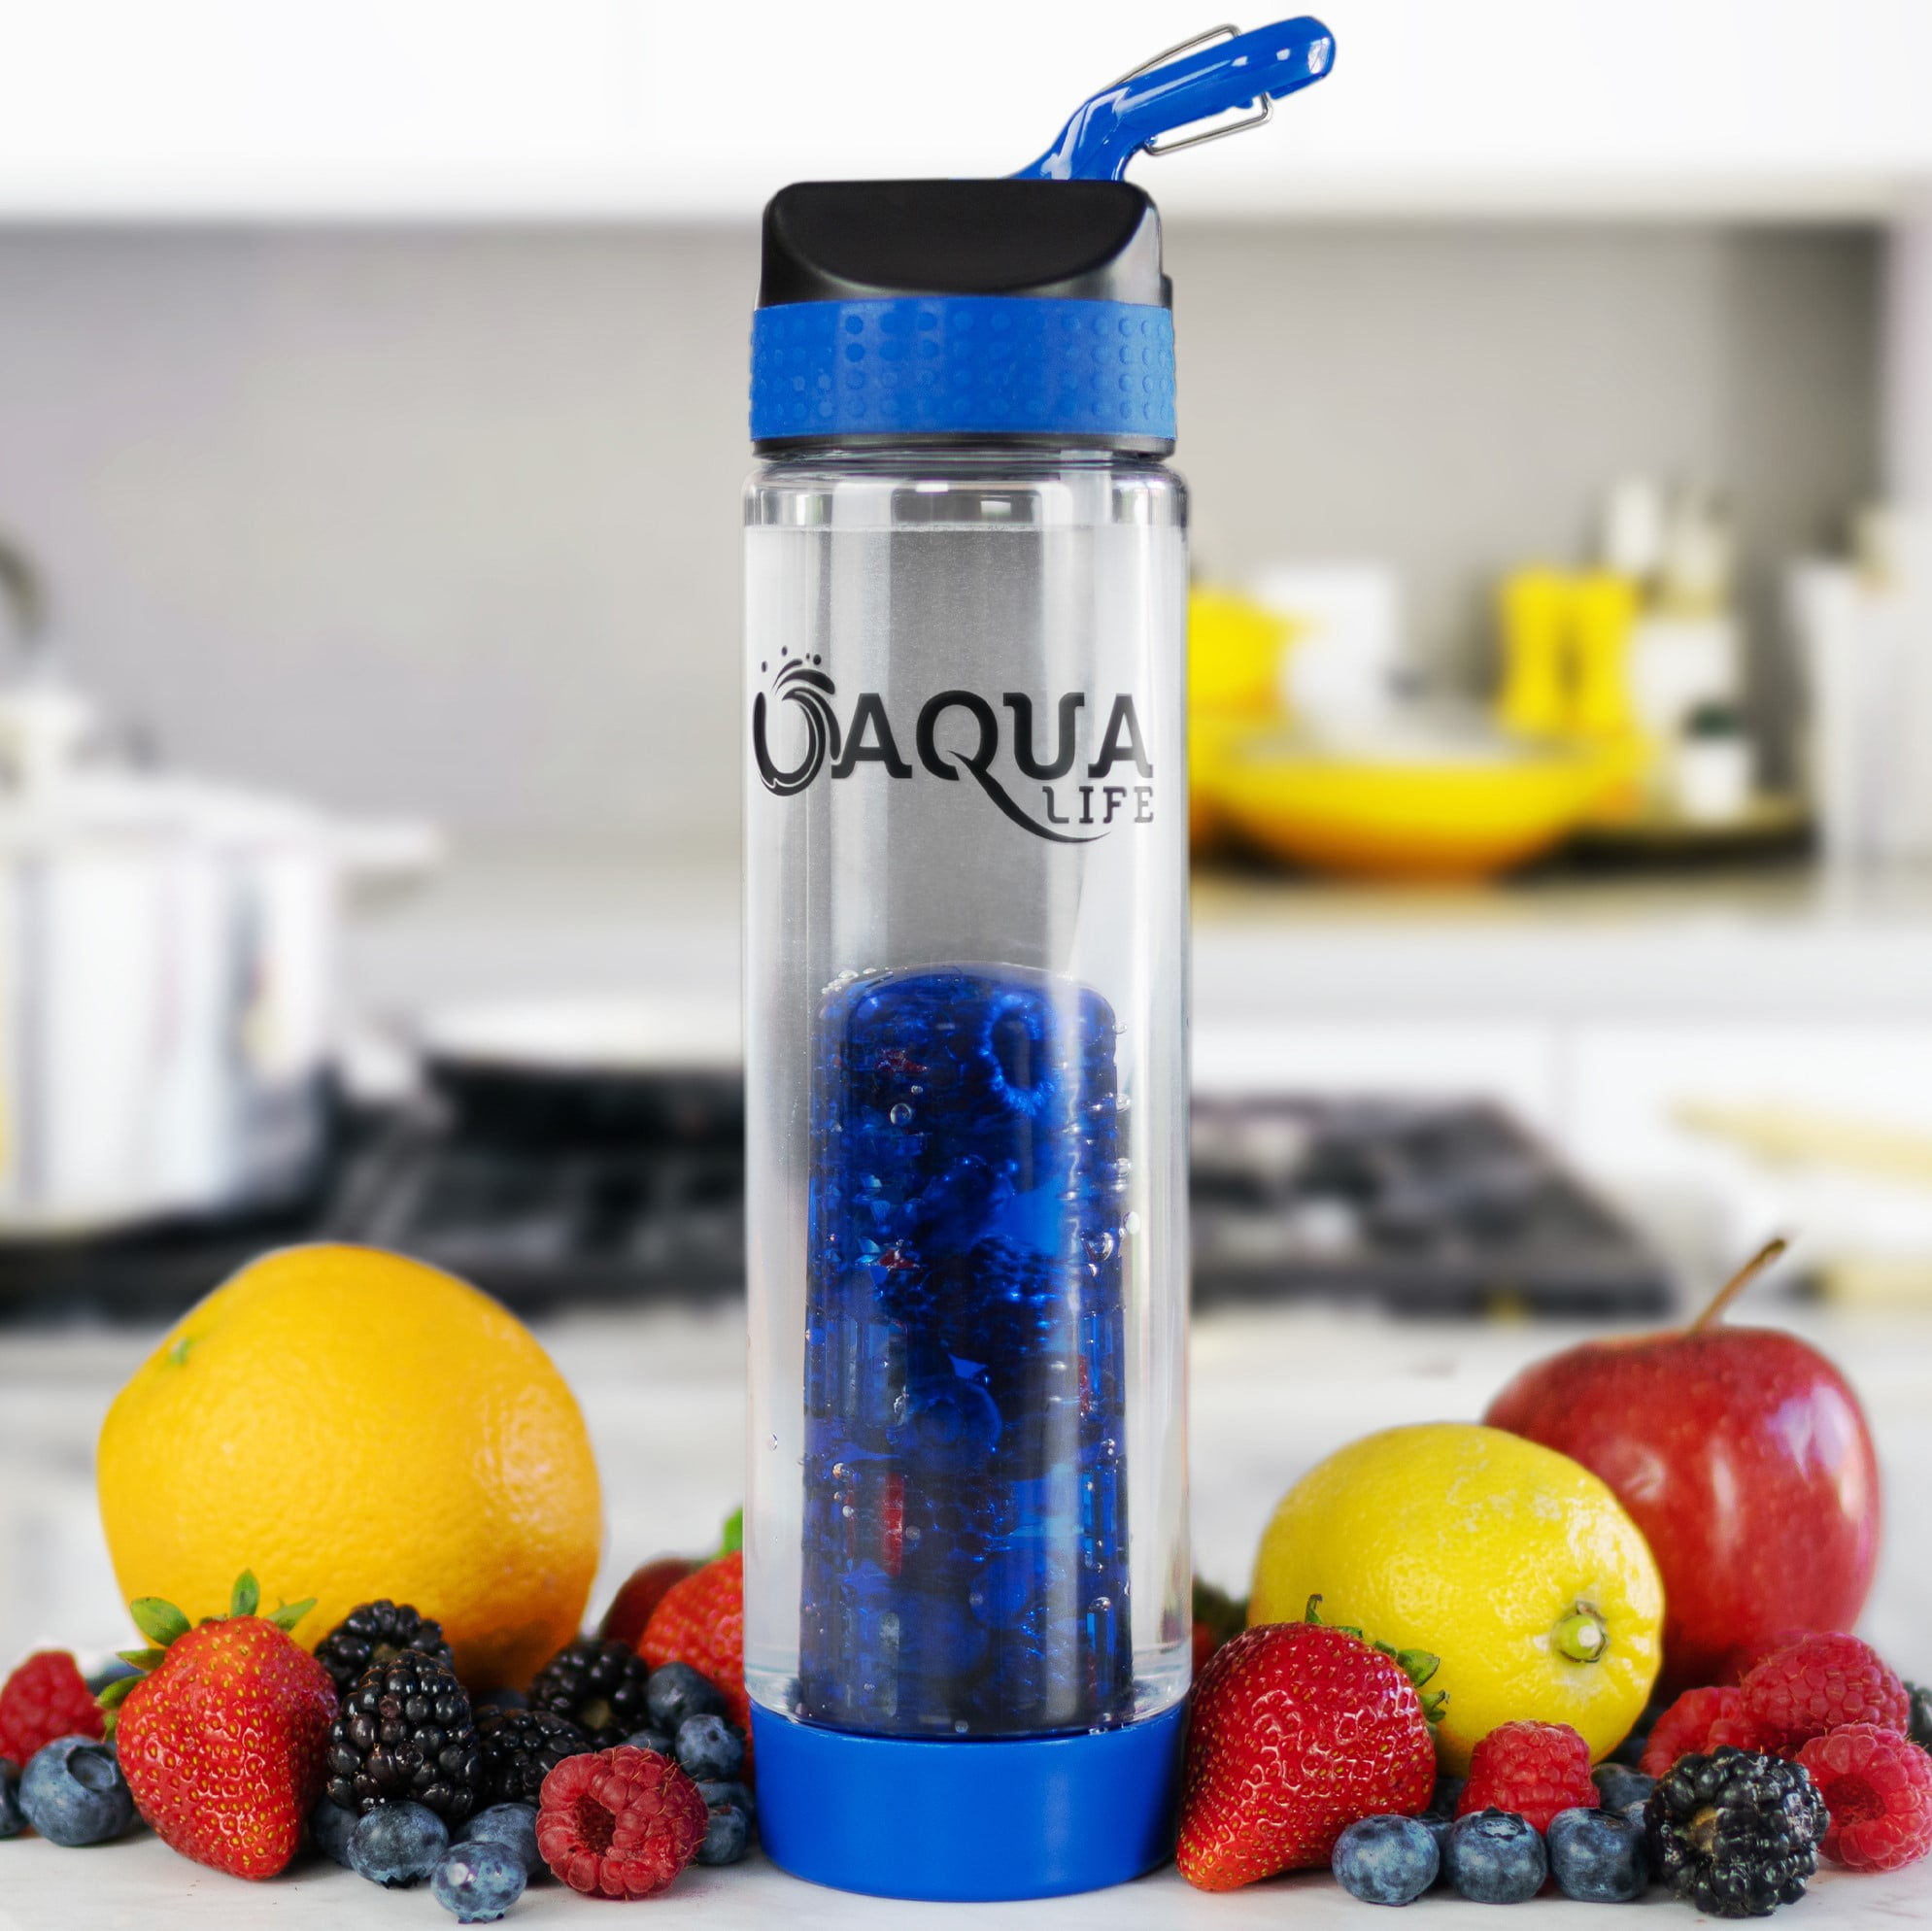 Orii Turquoise BPA Free Glass Hydration Water Bottle with Fruit Infuser for Flavorful Refreshment, 16oz, Size: 16 oz, Blue